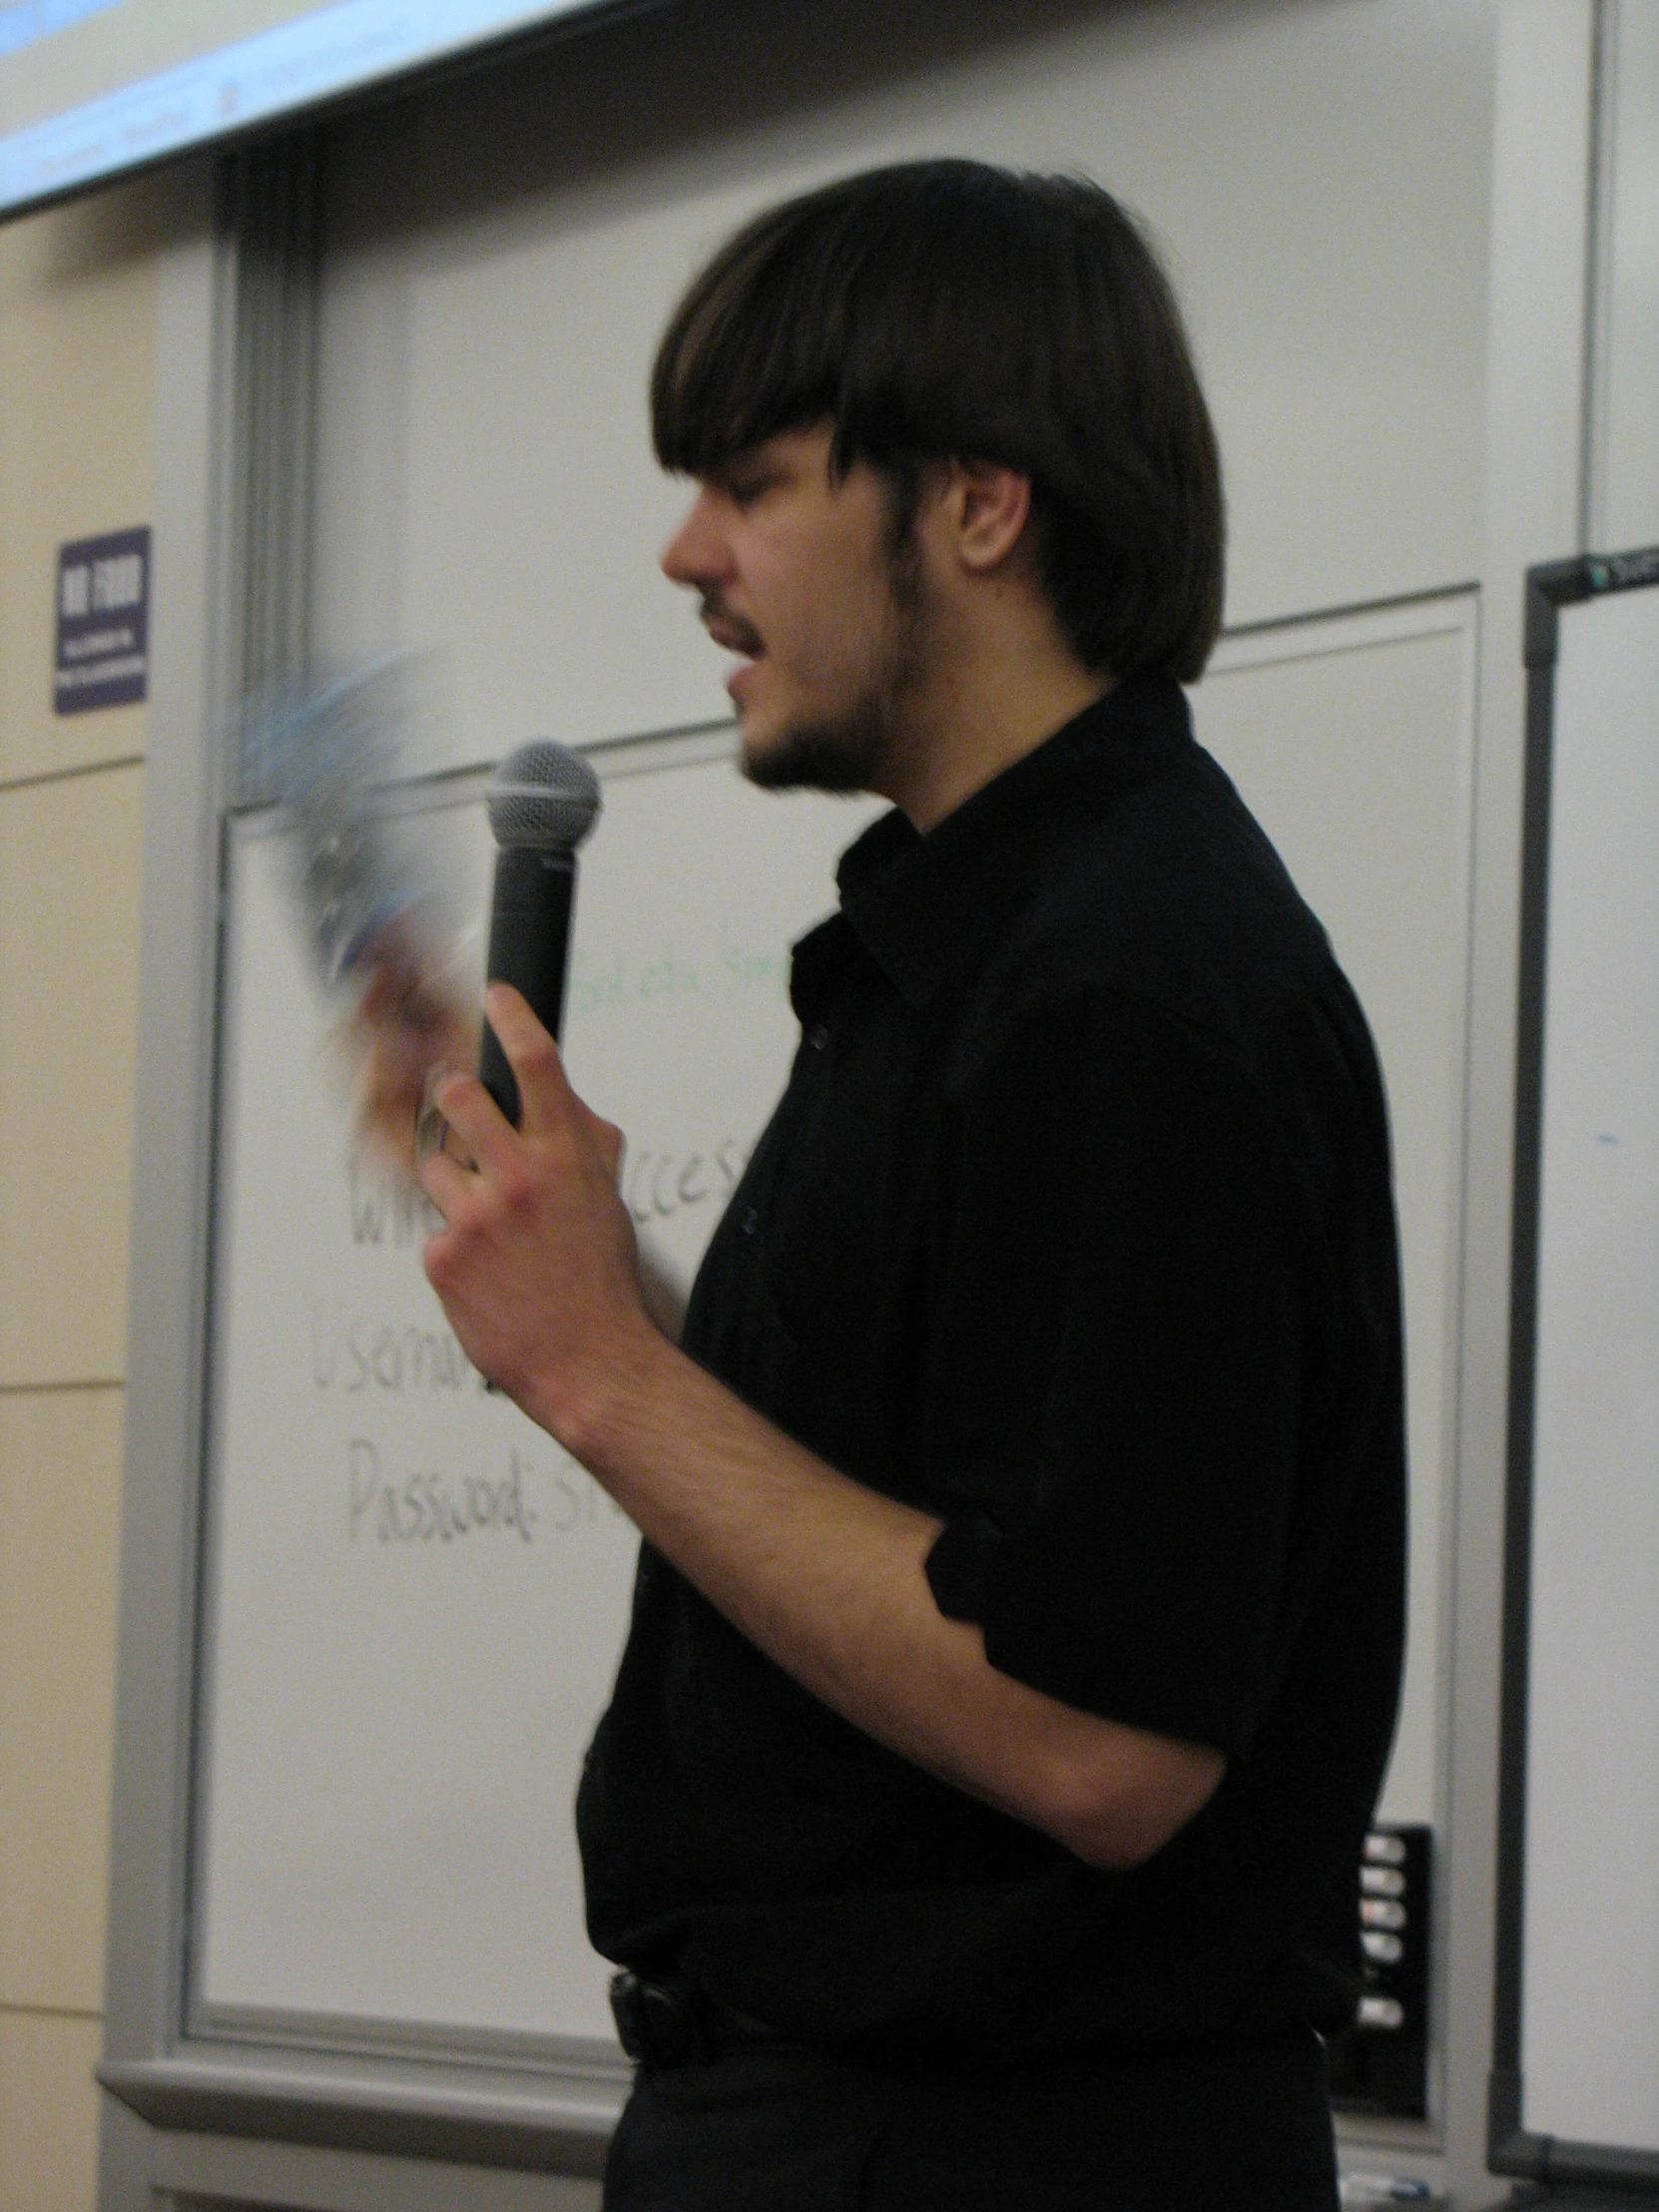 a man is holding a microphone and standing in front of a whiteboard